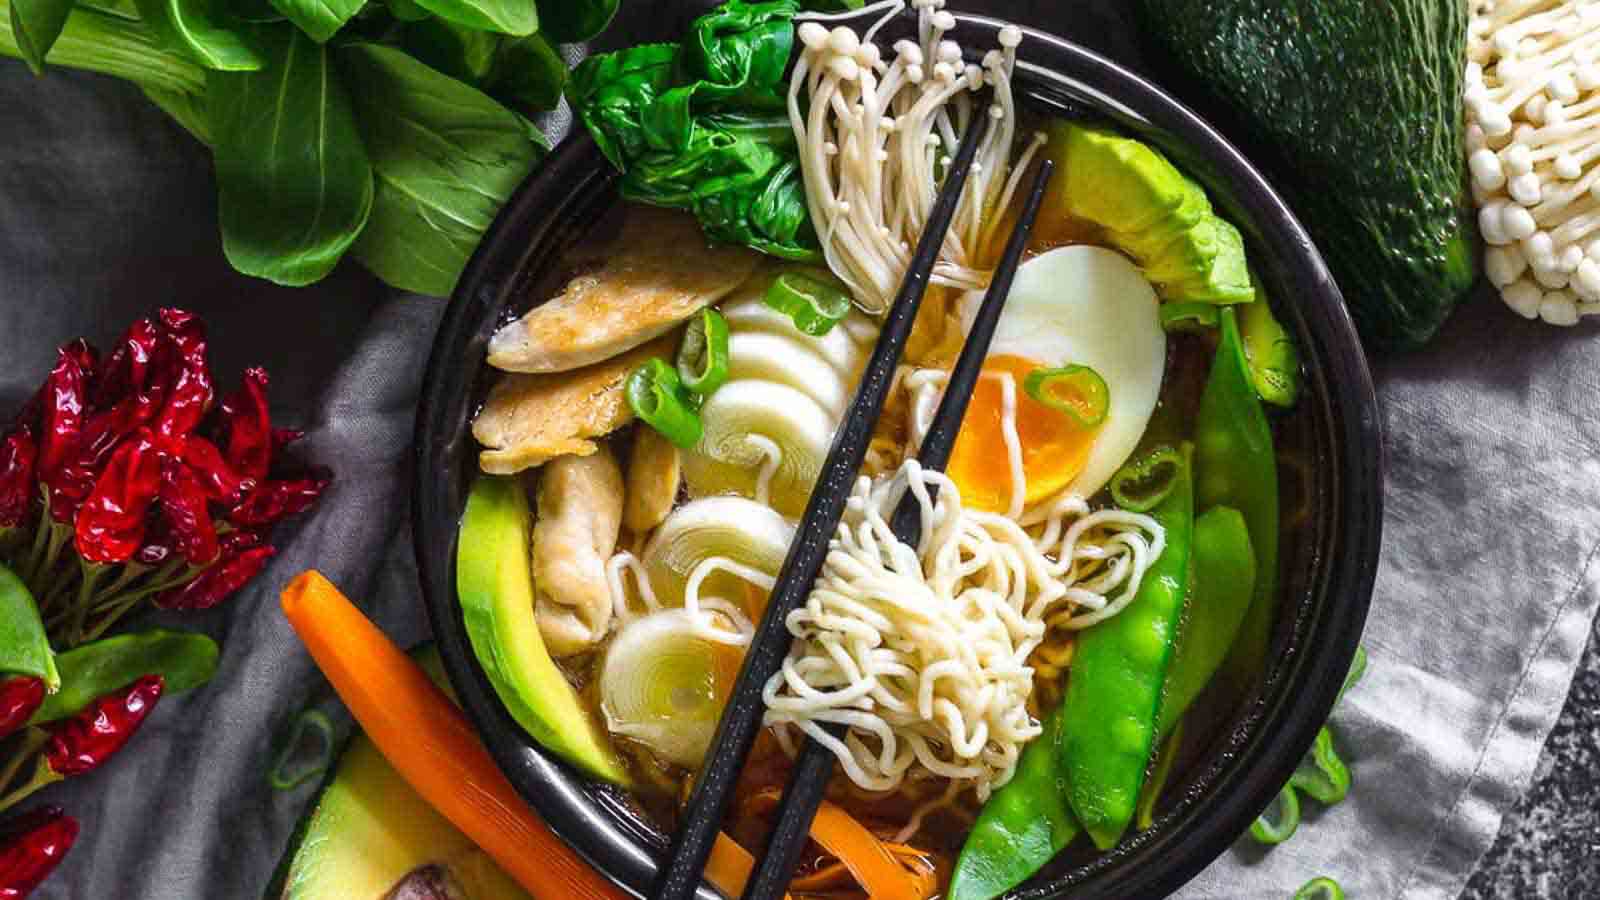 Keto Ramen Chicken Noodles in a black bowl with various vegetables and boiled egg.